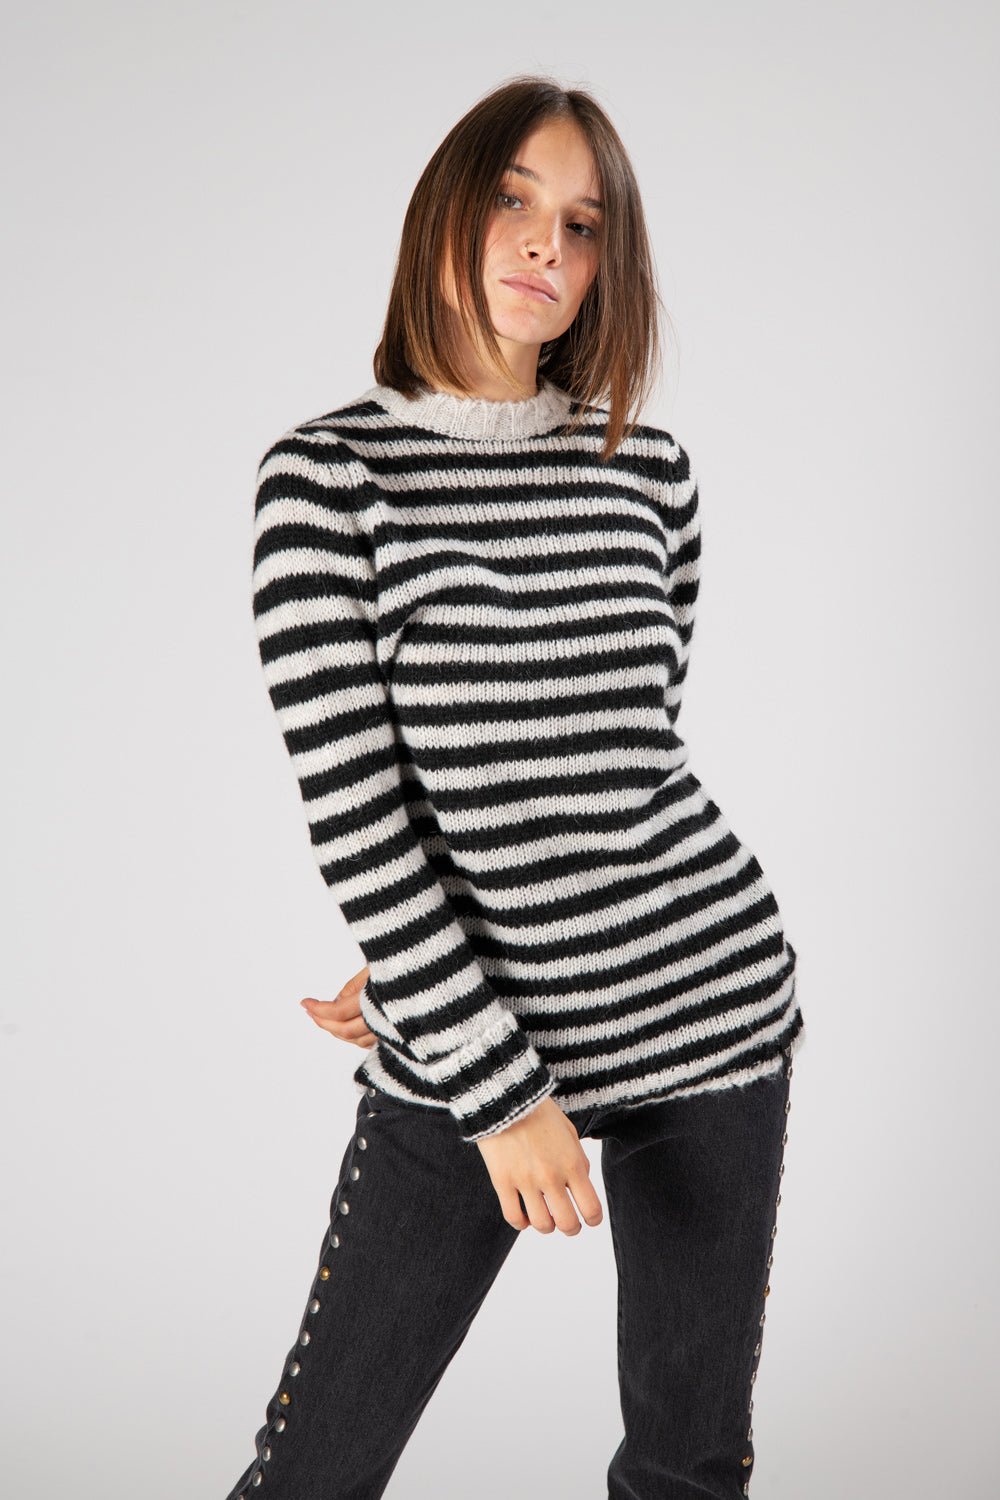 STRIPES KNIT SWEATER Striped knit round neck sweater. 42% Acrylic 30% Polyamide 14% Mohair 14% Wool HTC LOS ANGELES